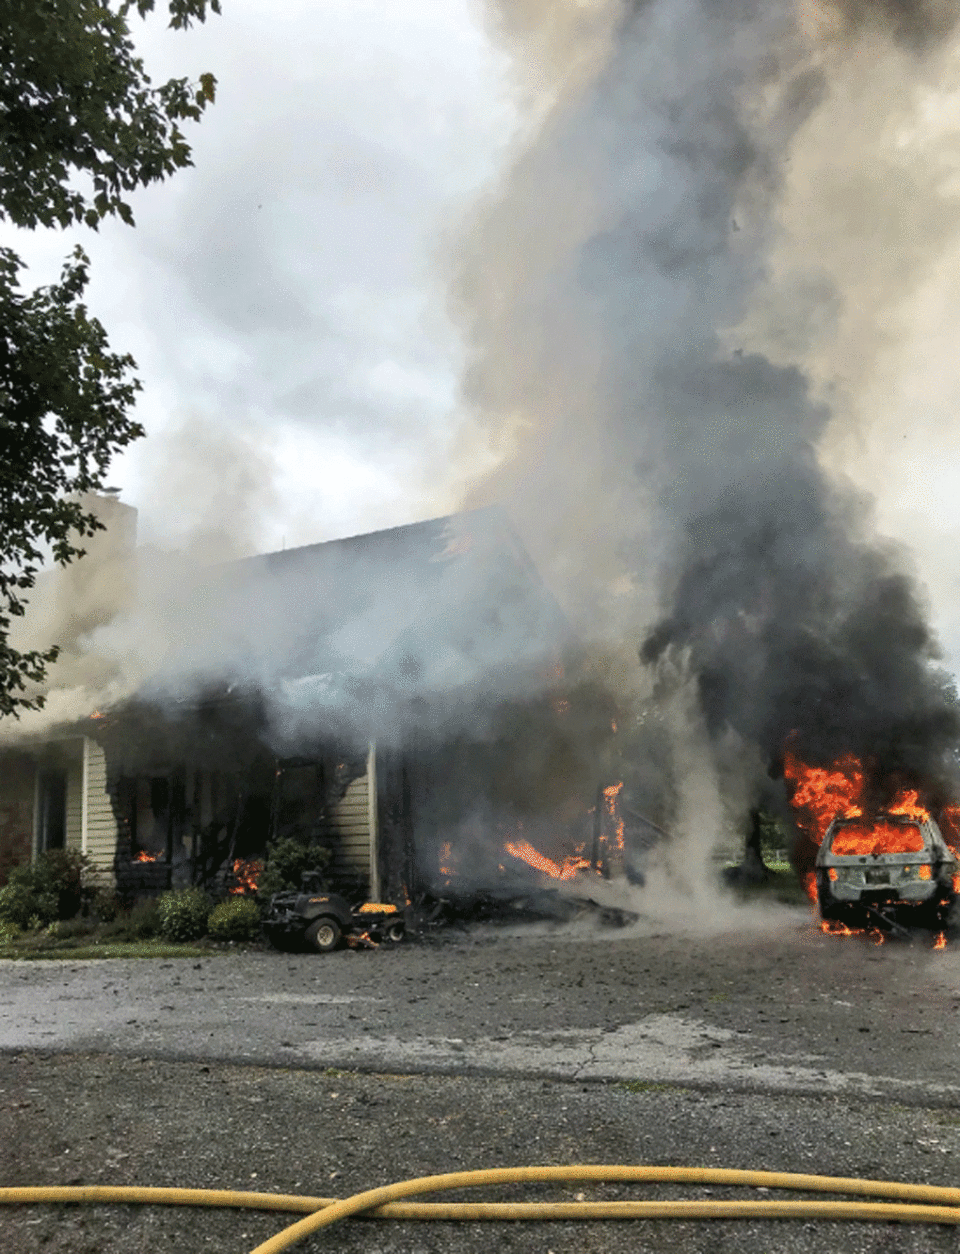 Montgomery County firefighters respond to a house in flames on Sugarland Road in Poolesville, Maryland, on June 11, 2018. (Courtesy, Montgomery County Fire and Rescue) 